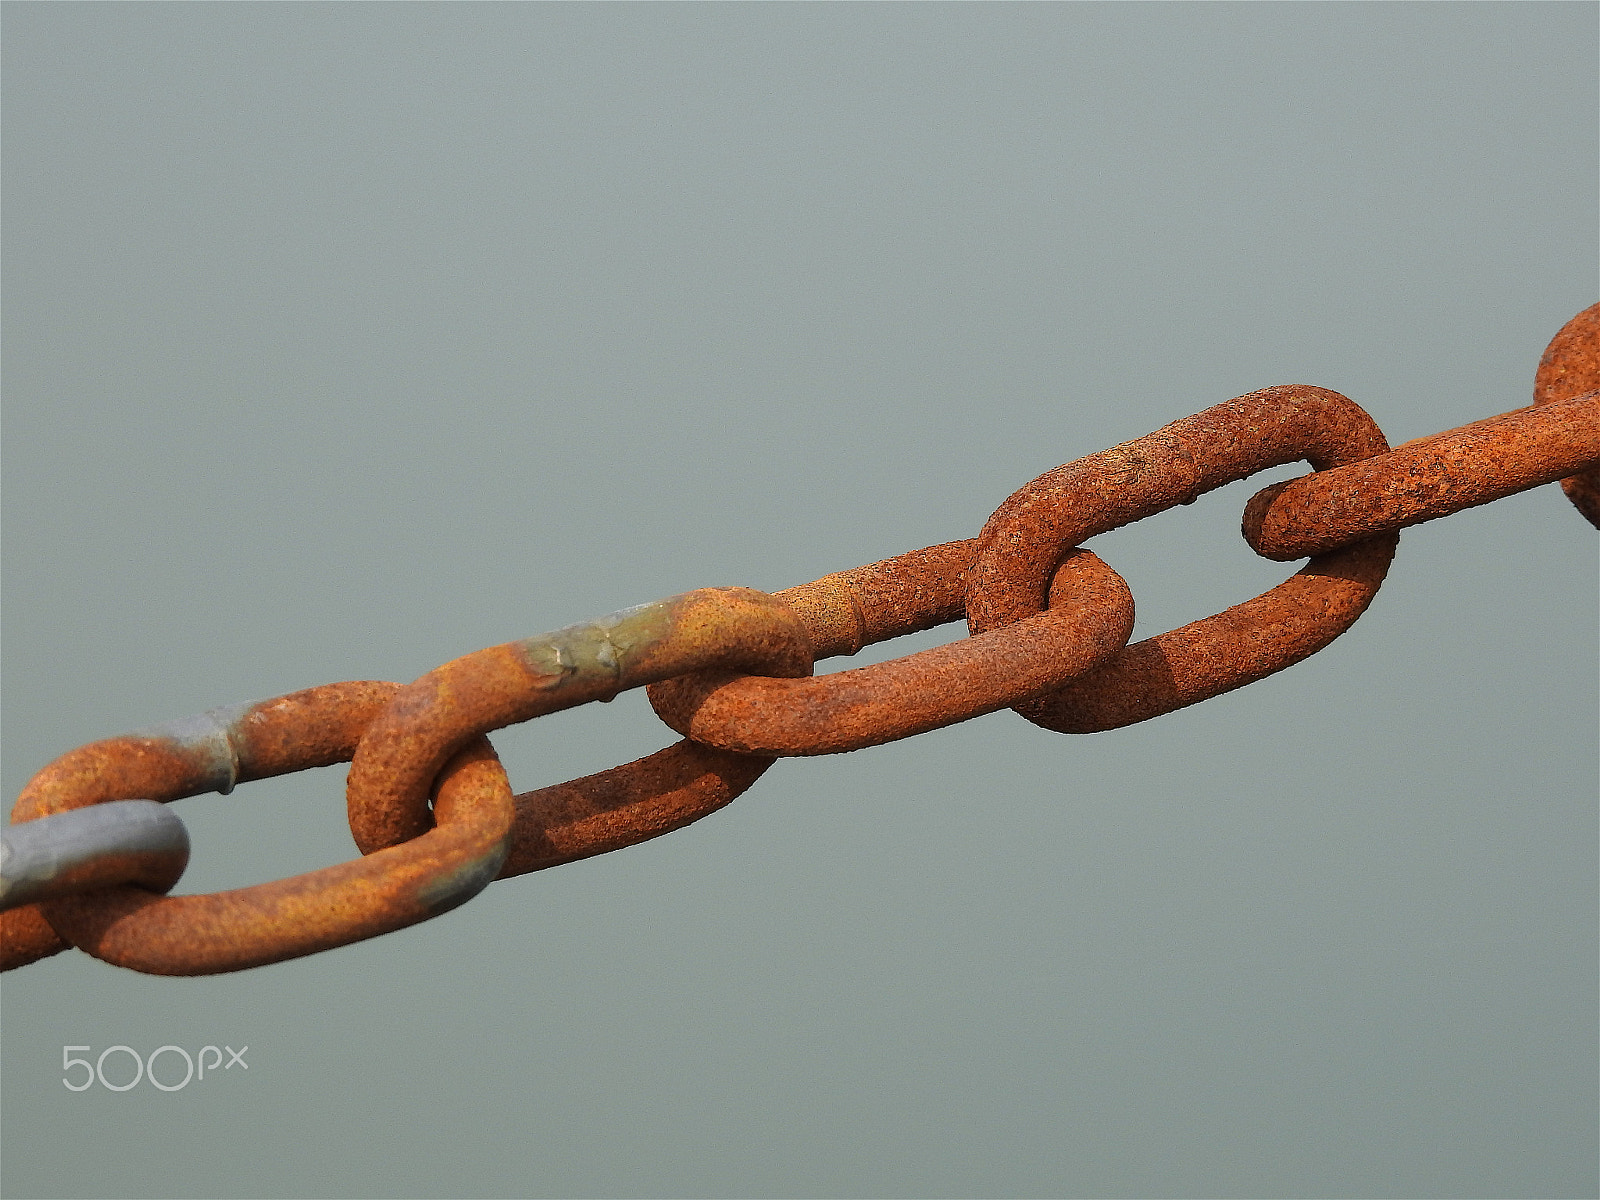 Nikon COOLPIX P900s sample photo. A rusty chain photography